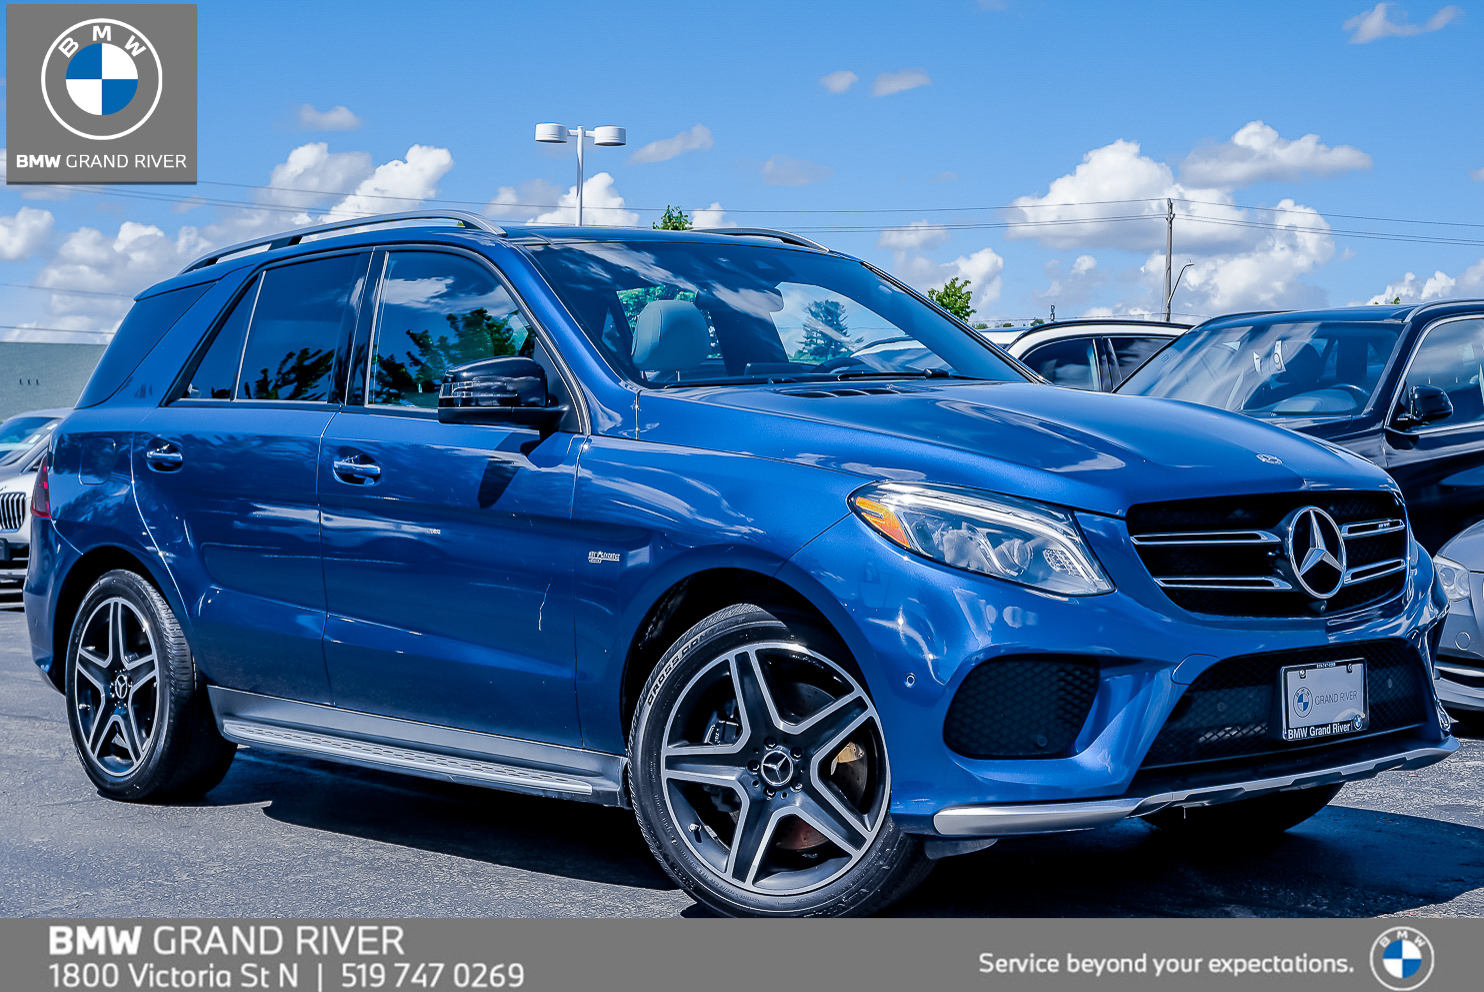 2018 Mercedes-Benz AMG GLE 43(please delete) JUST ARRIVED | PICTURES TO COME SOON |